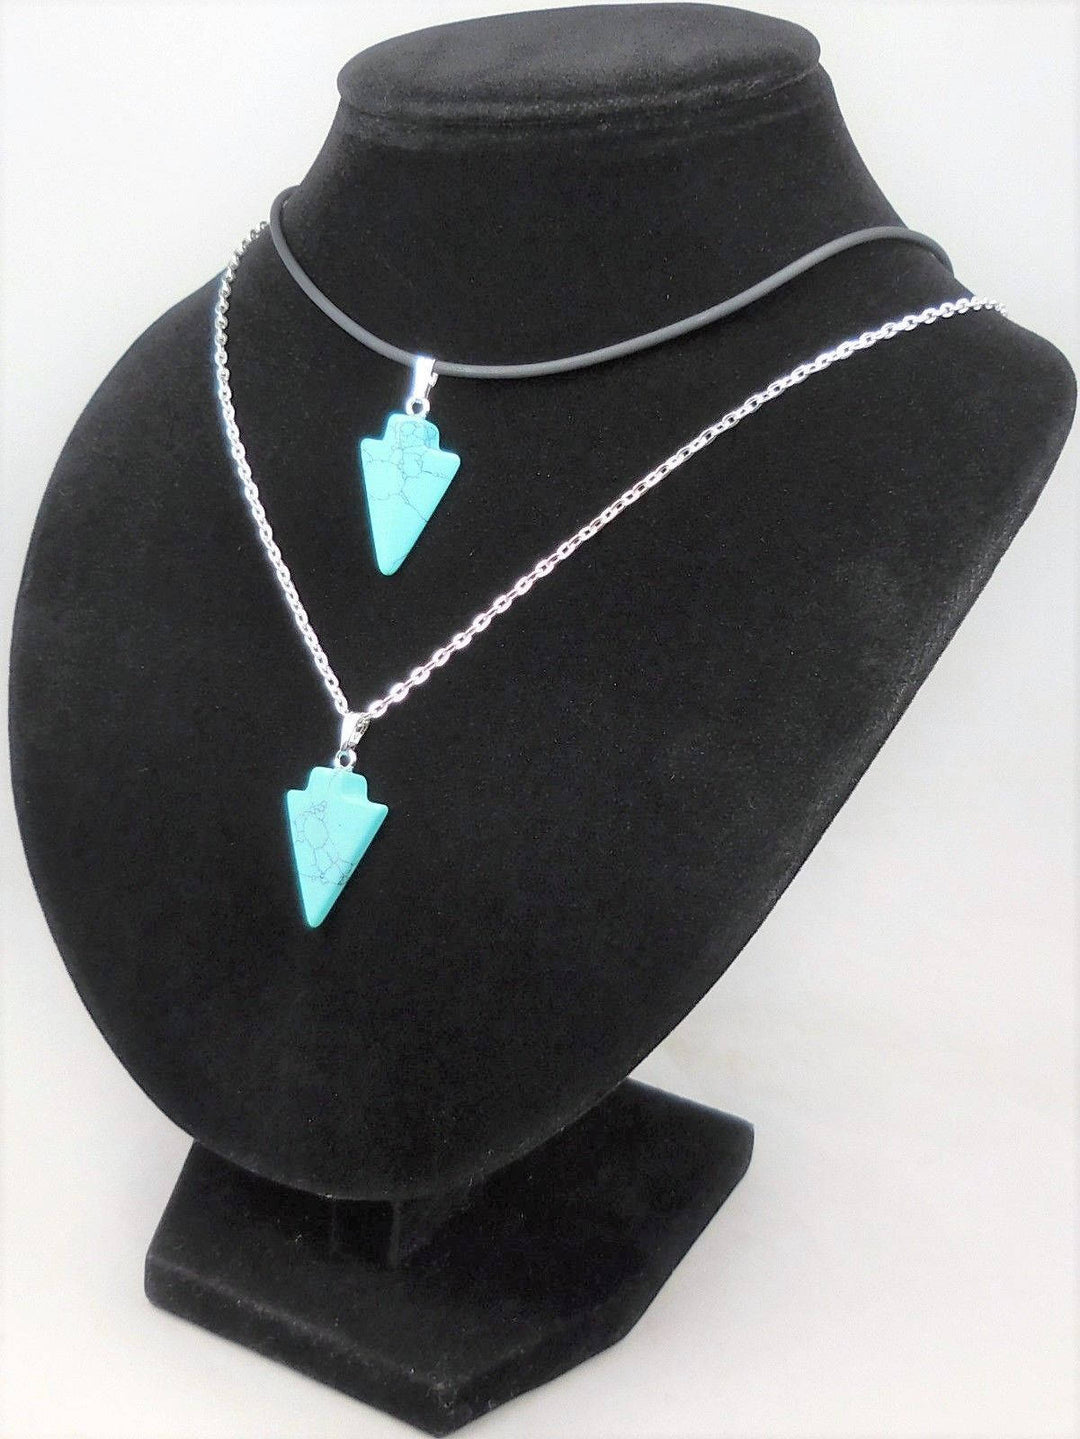 Arrowhead Necklace - Petite Turquoise Howlite Pendant - Carved Arrow Charm Stone Earrings (A19) Healing Crystals and Stones Jewelry